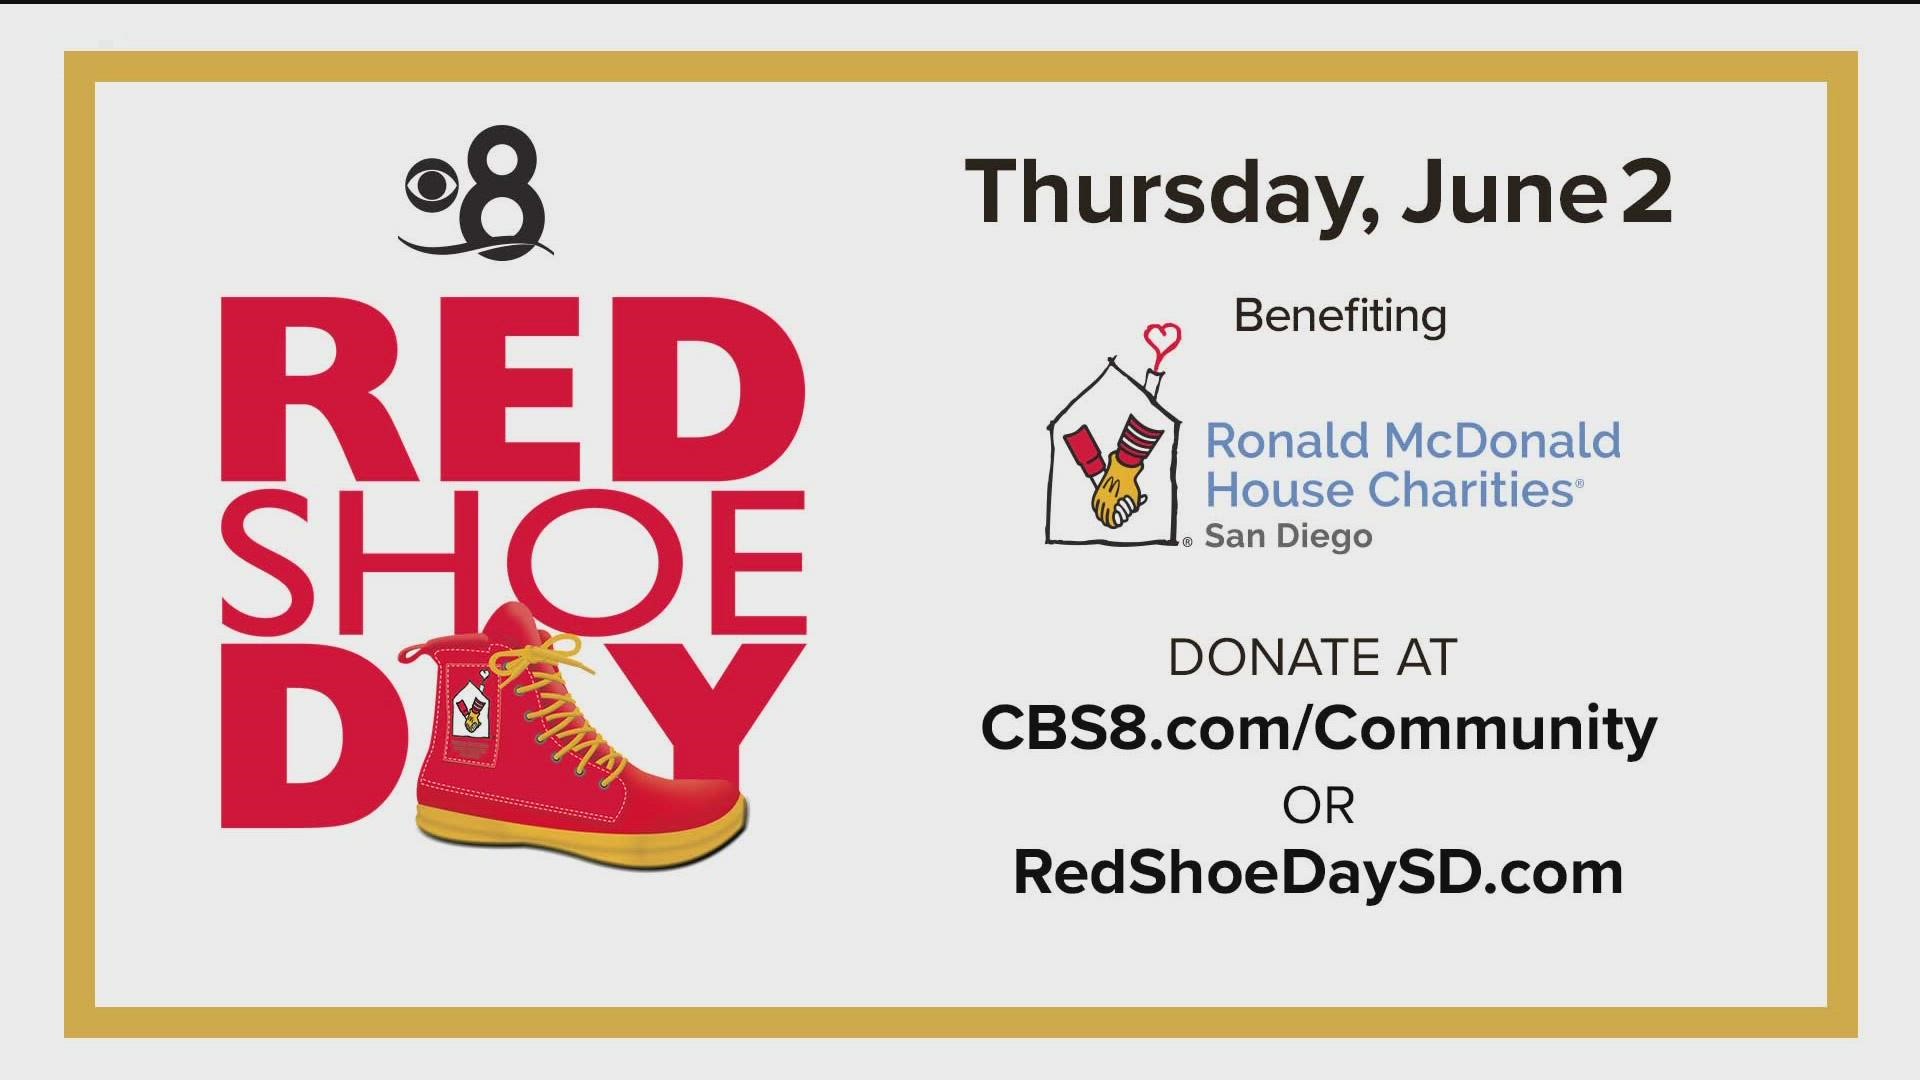 Thank you for supporting San Diego's Ronald McDonald House to provide help for families of children in medical need.